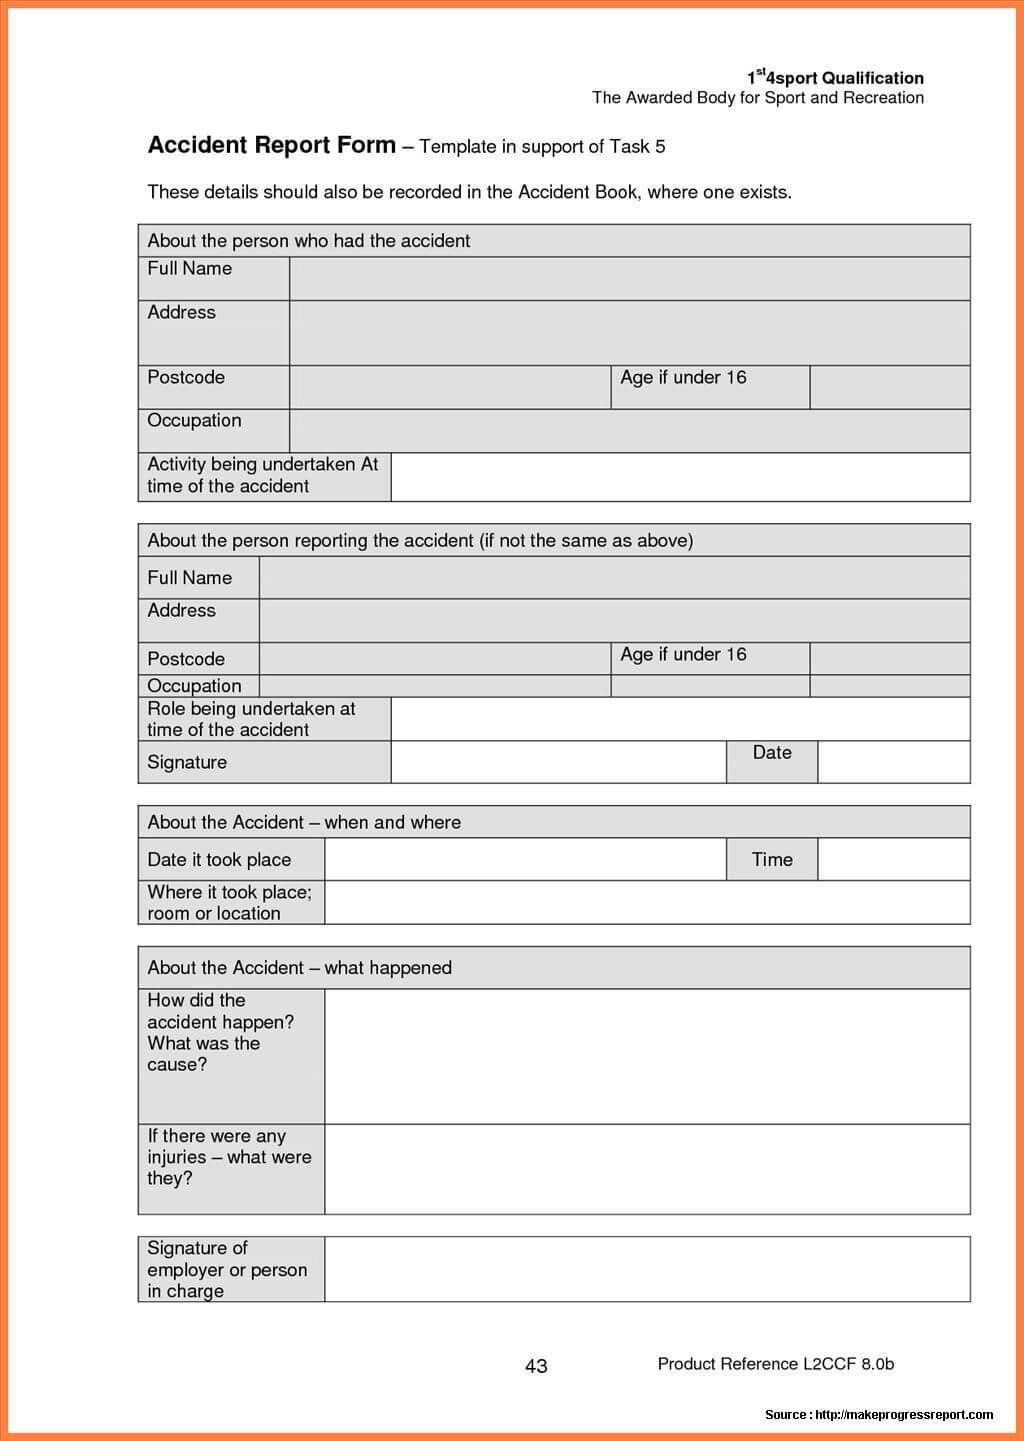 Construction Accident Report Form Sample | Work | Report Within Itil Incident Report Form Template